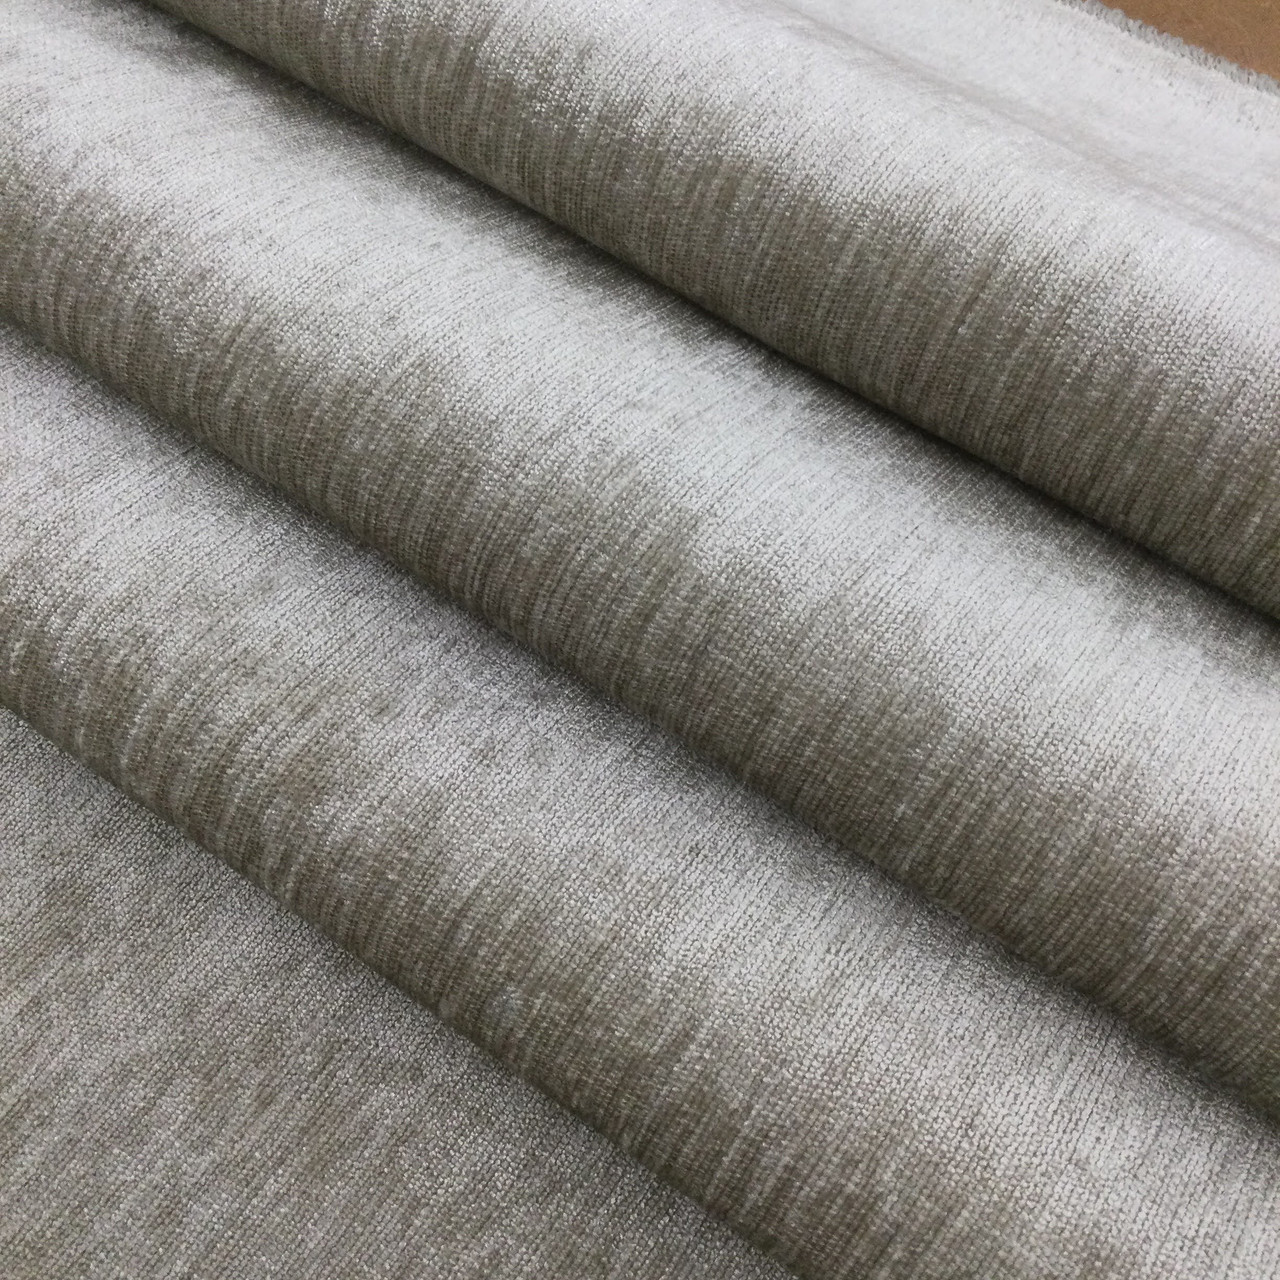 Flax Beige Chenille Fabric, Heavyweight Upholstery, 54 Wide, By the  Yard